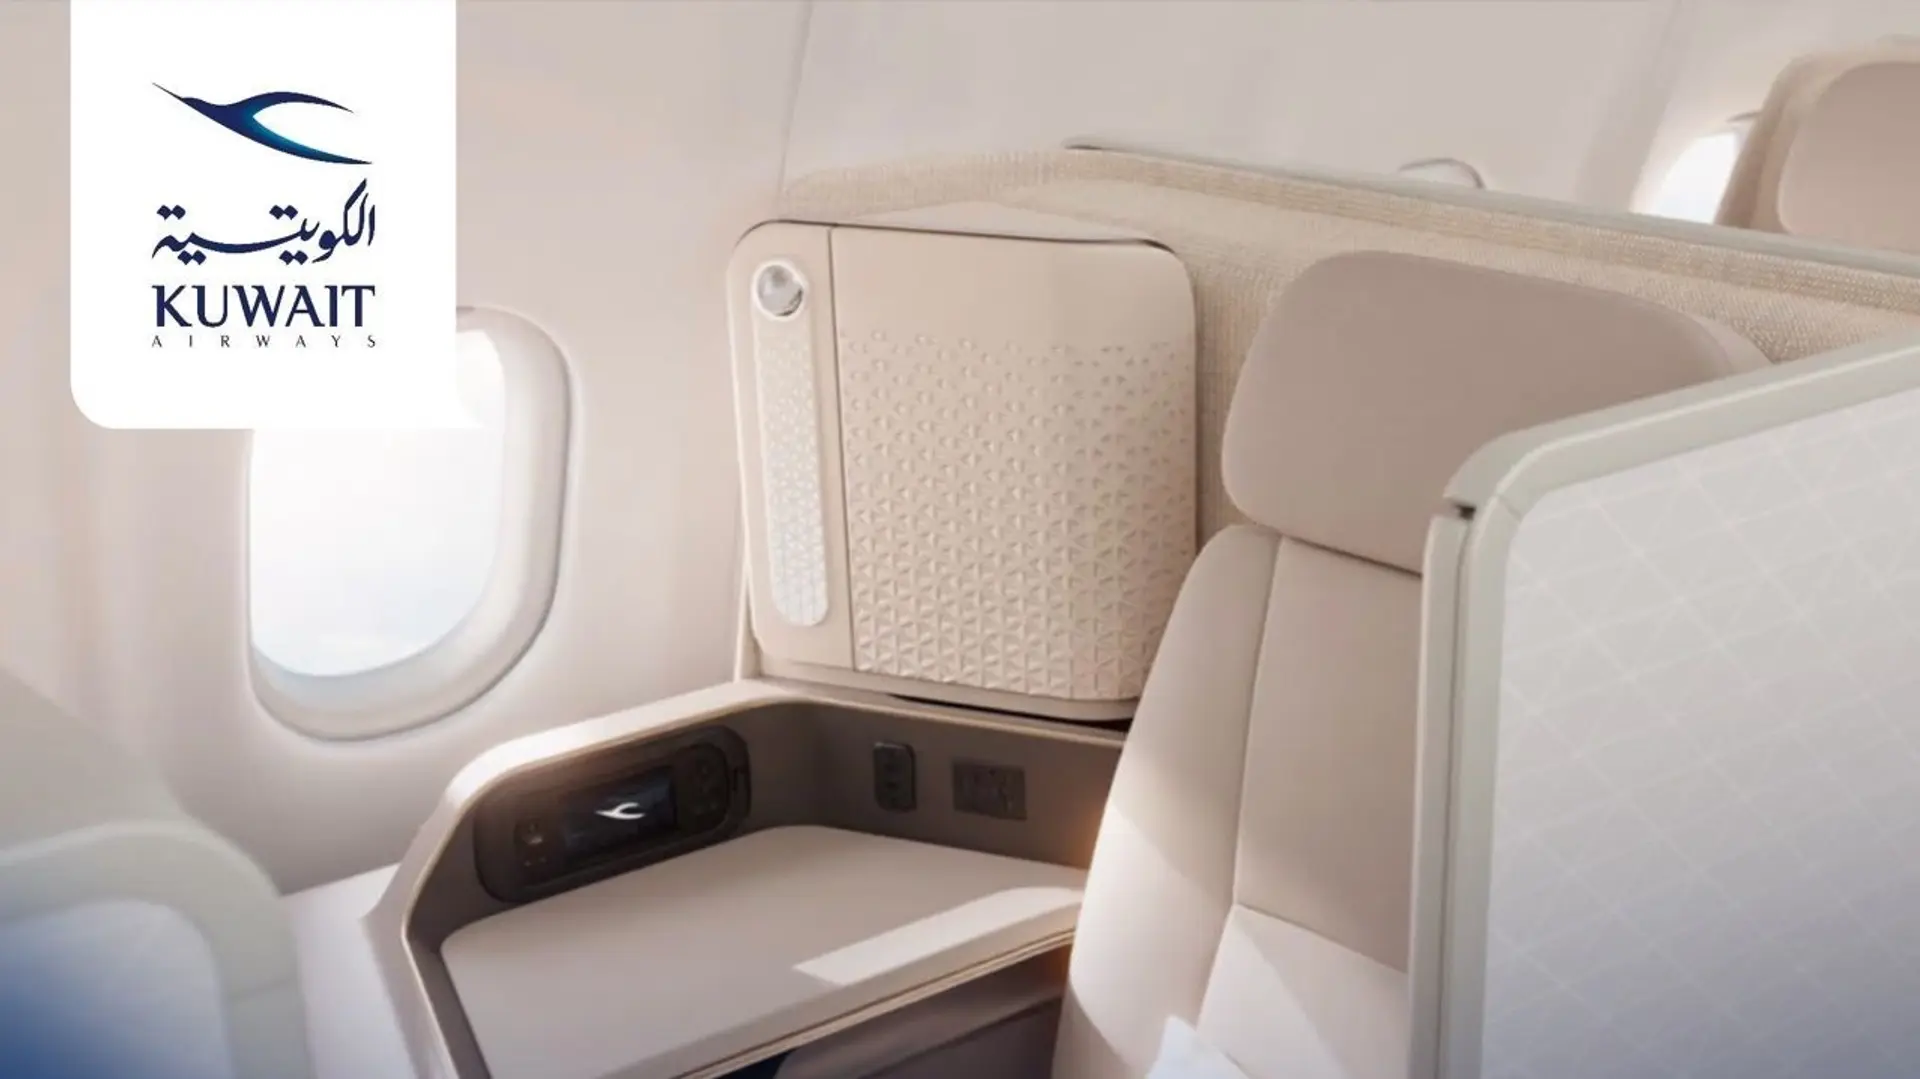 Airlines News - Kuwait Airways expands and upgrades - from uniforms to Business Class cabins